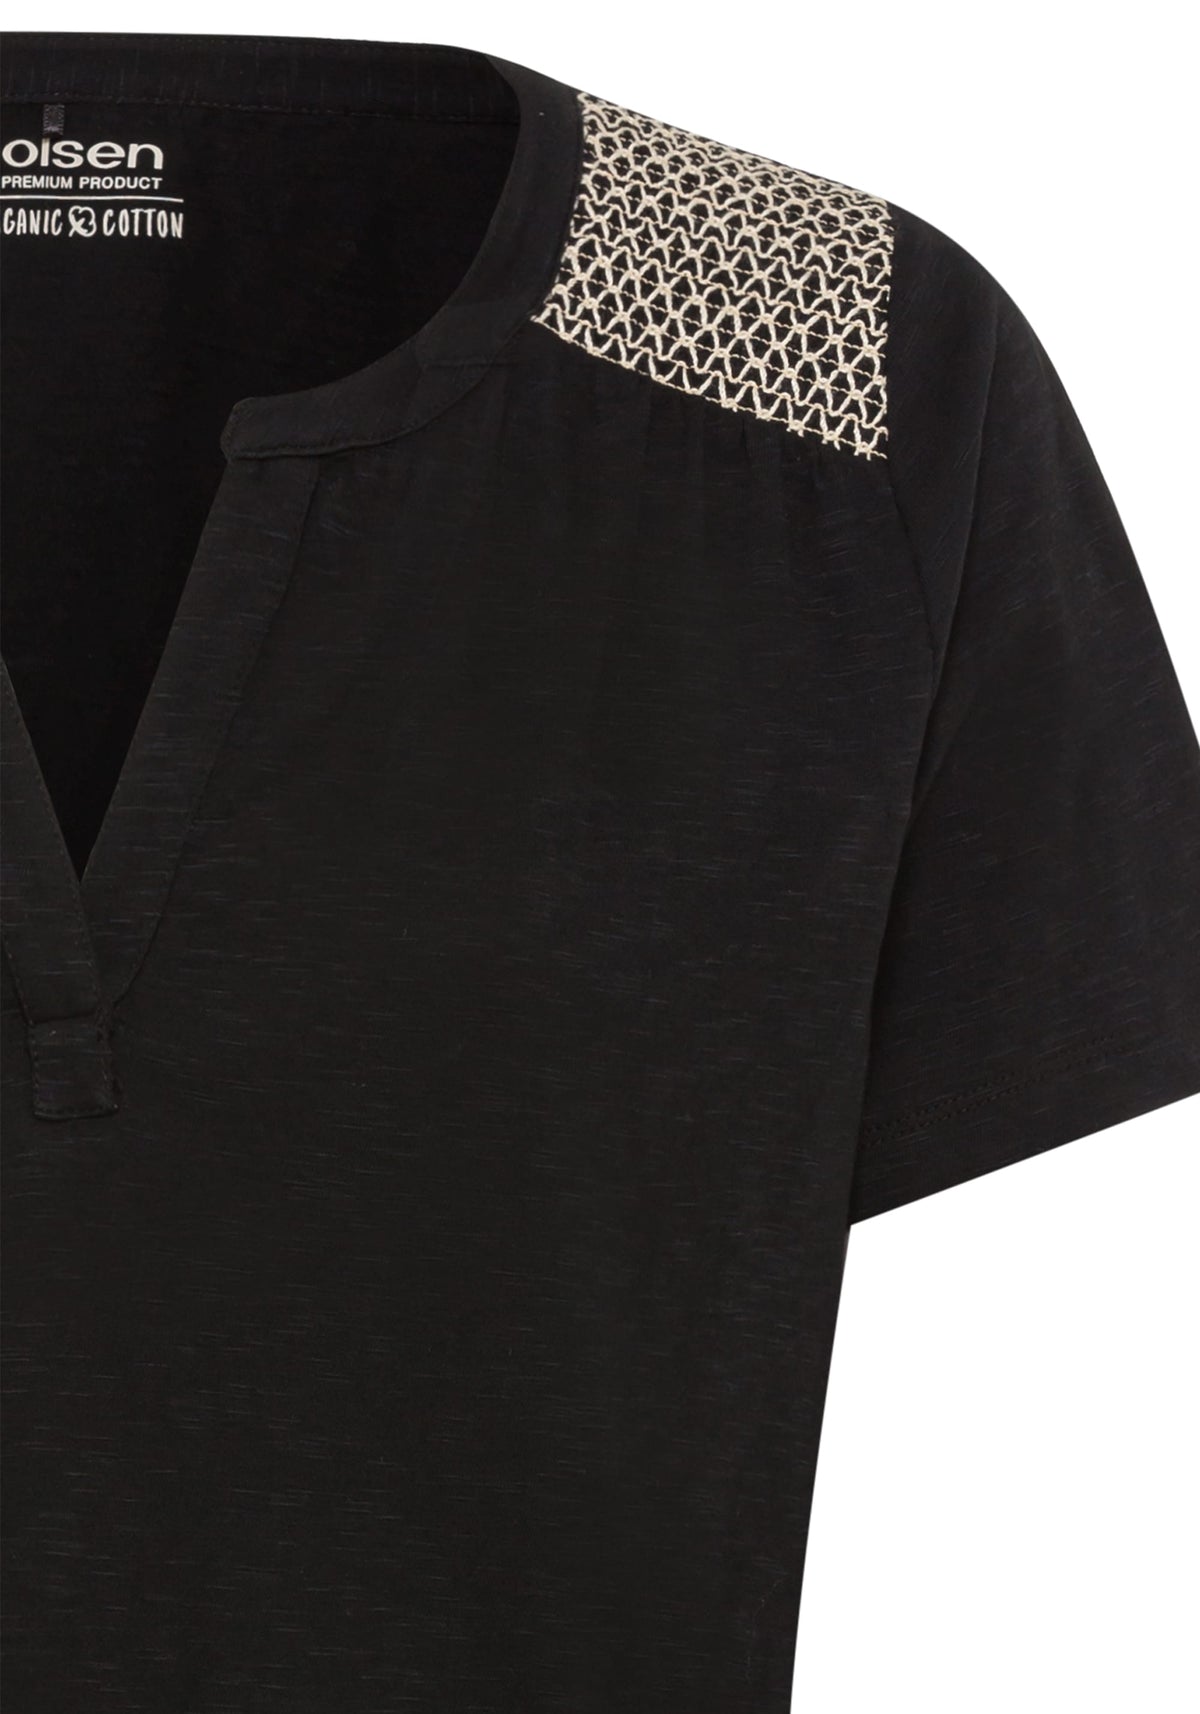 100% Organic Cotton Short Sleeve Tunic T-Shirt with Embroidered Detail